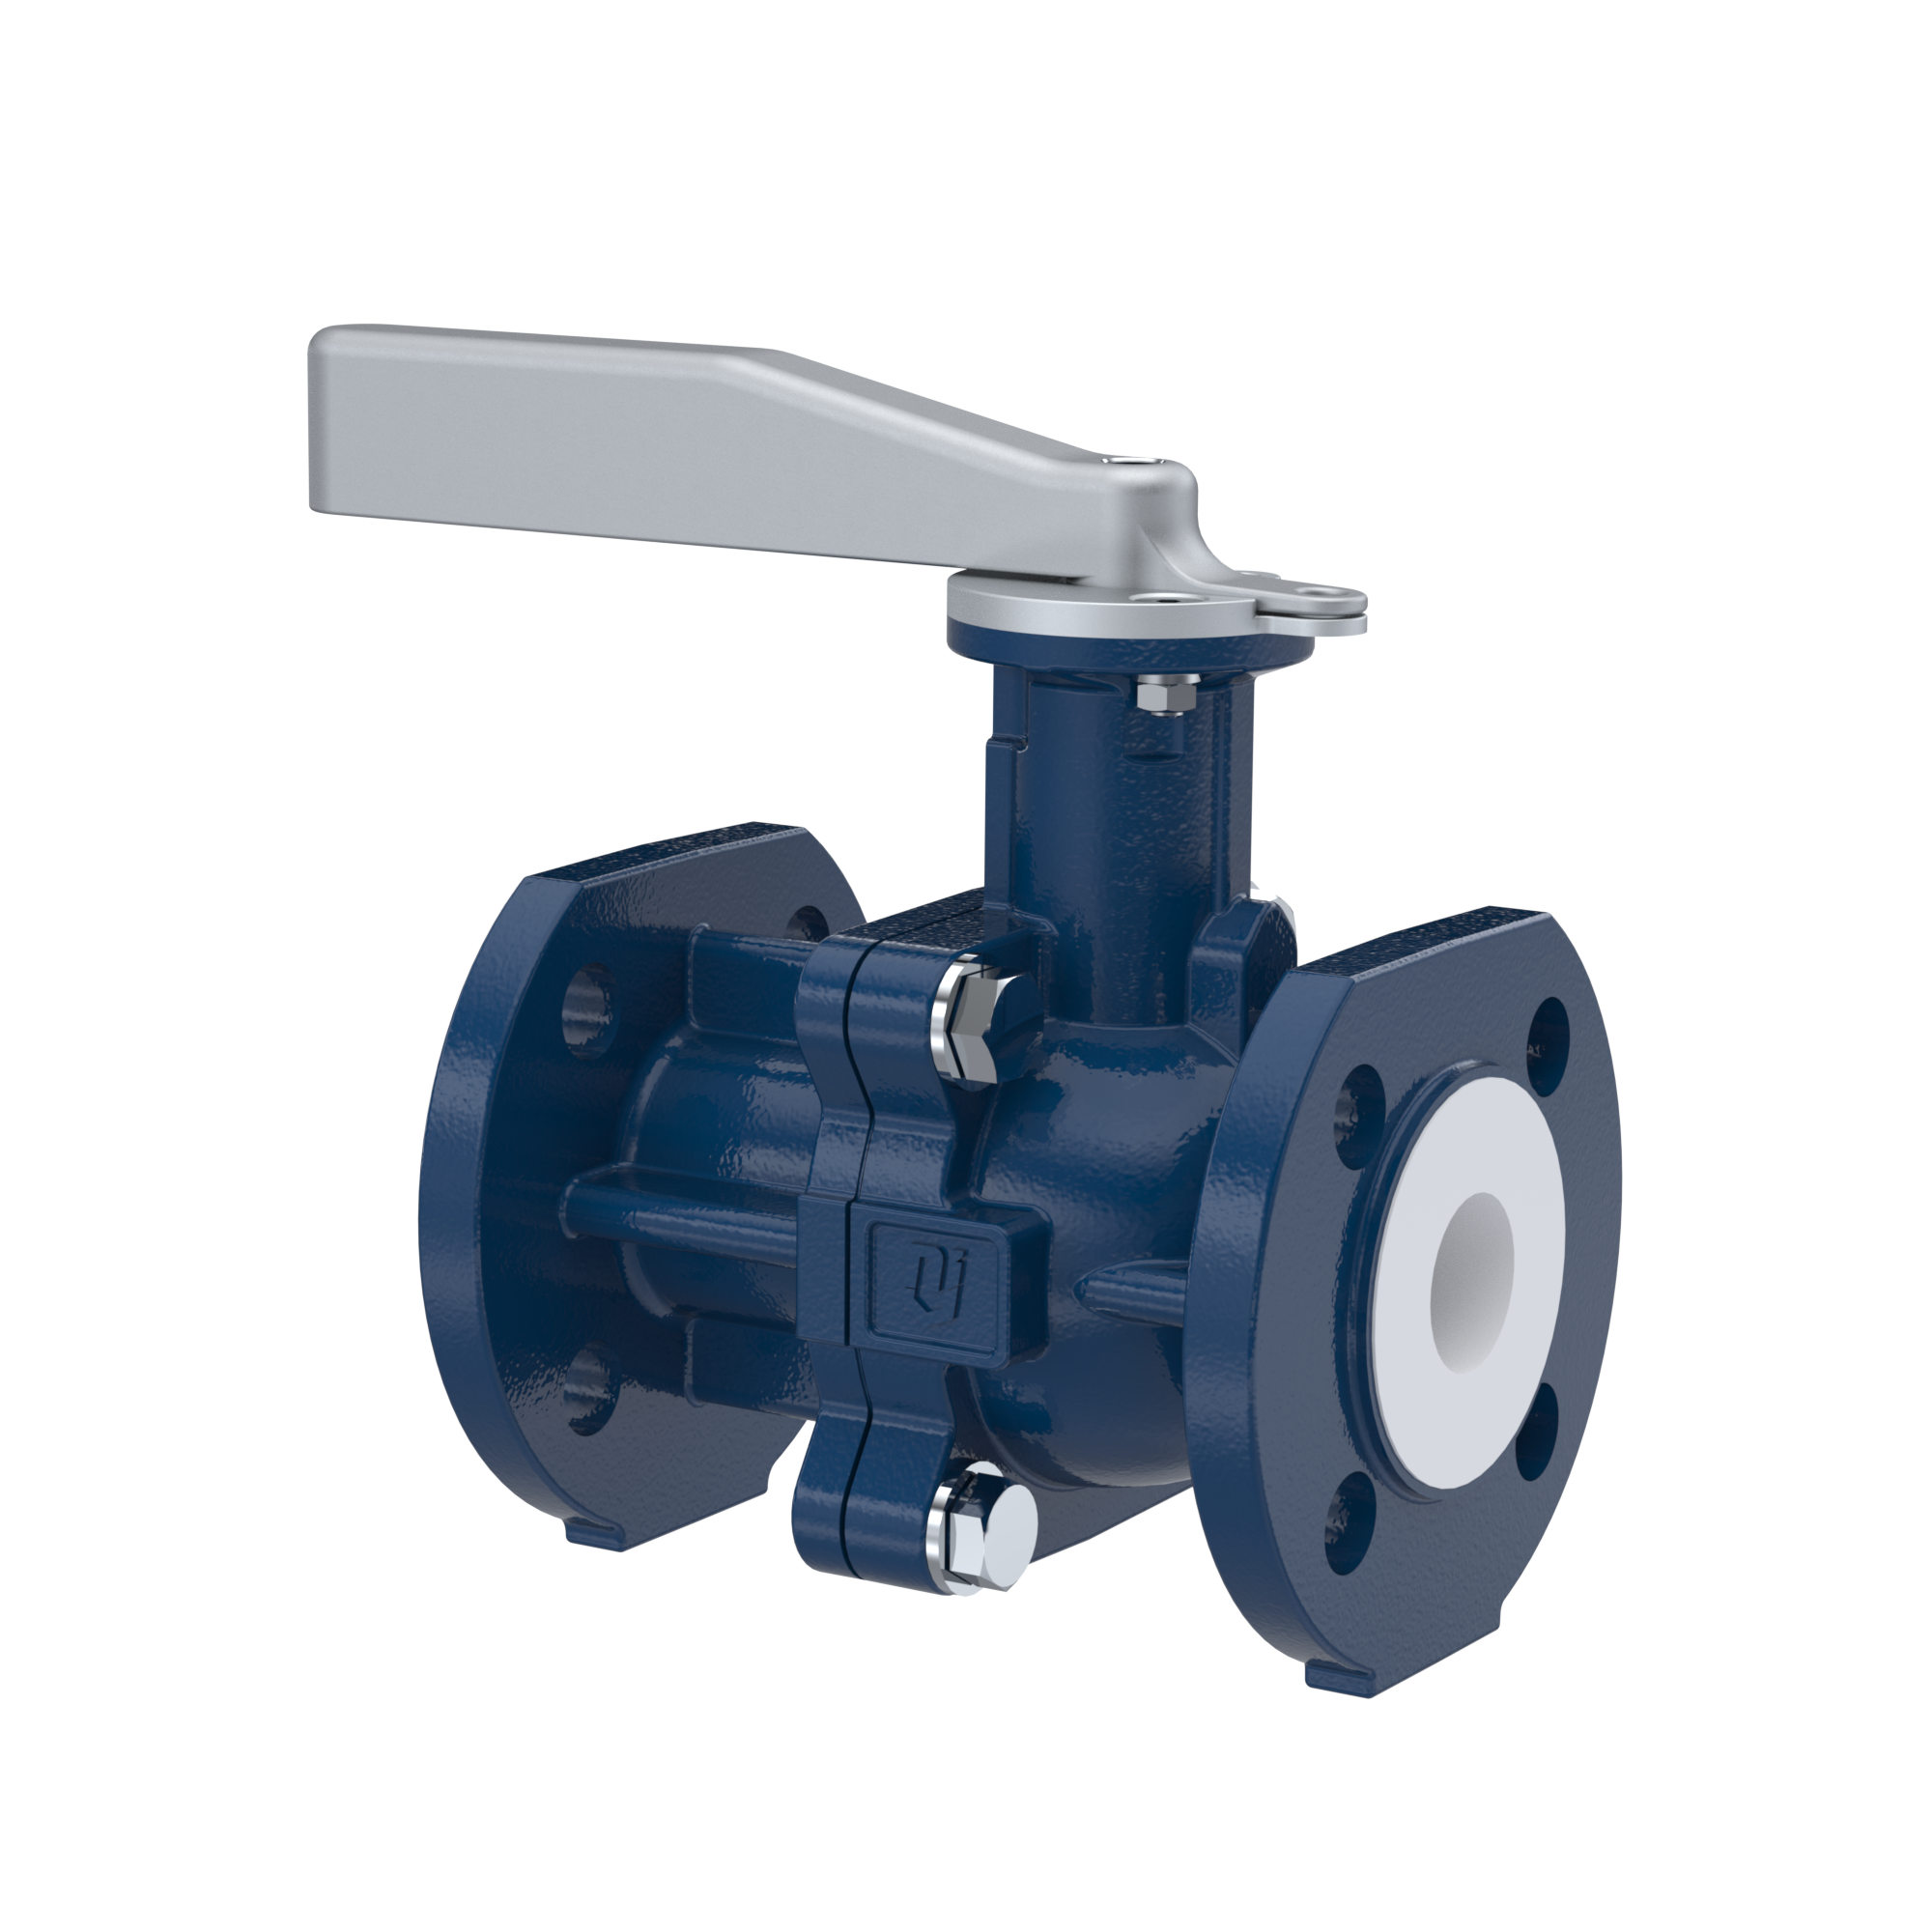 PFA-flange ball valve FK13 DN25 - 1" inch PN10/16 made of spheroidal graphite cast iron with lever hand